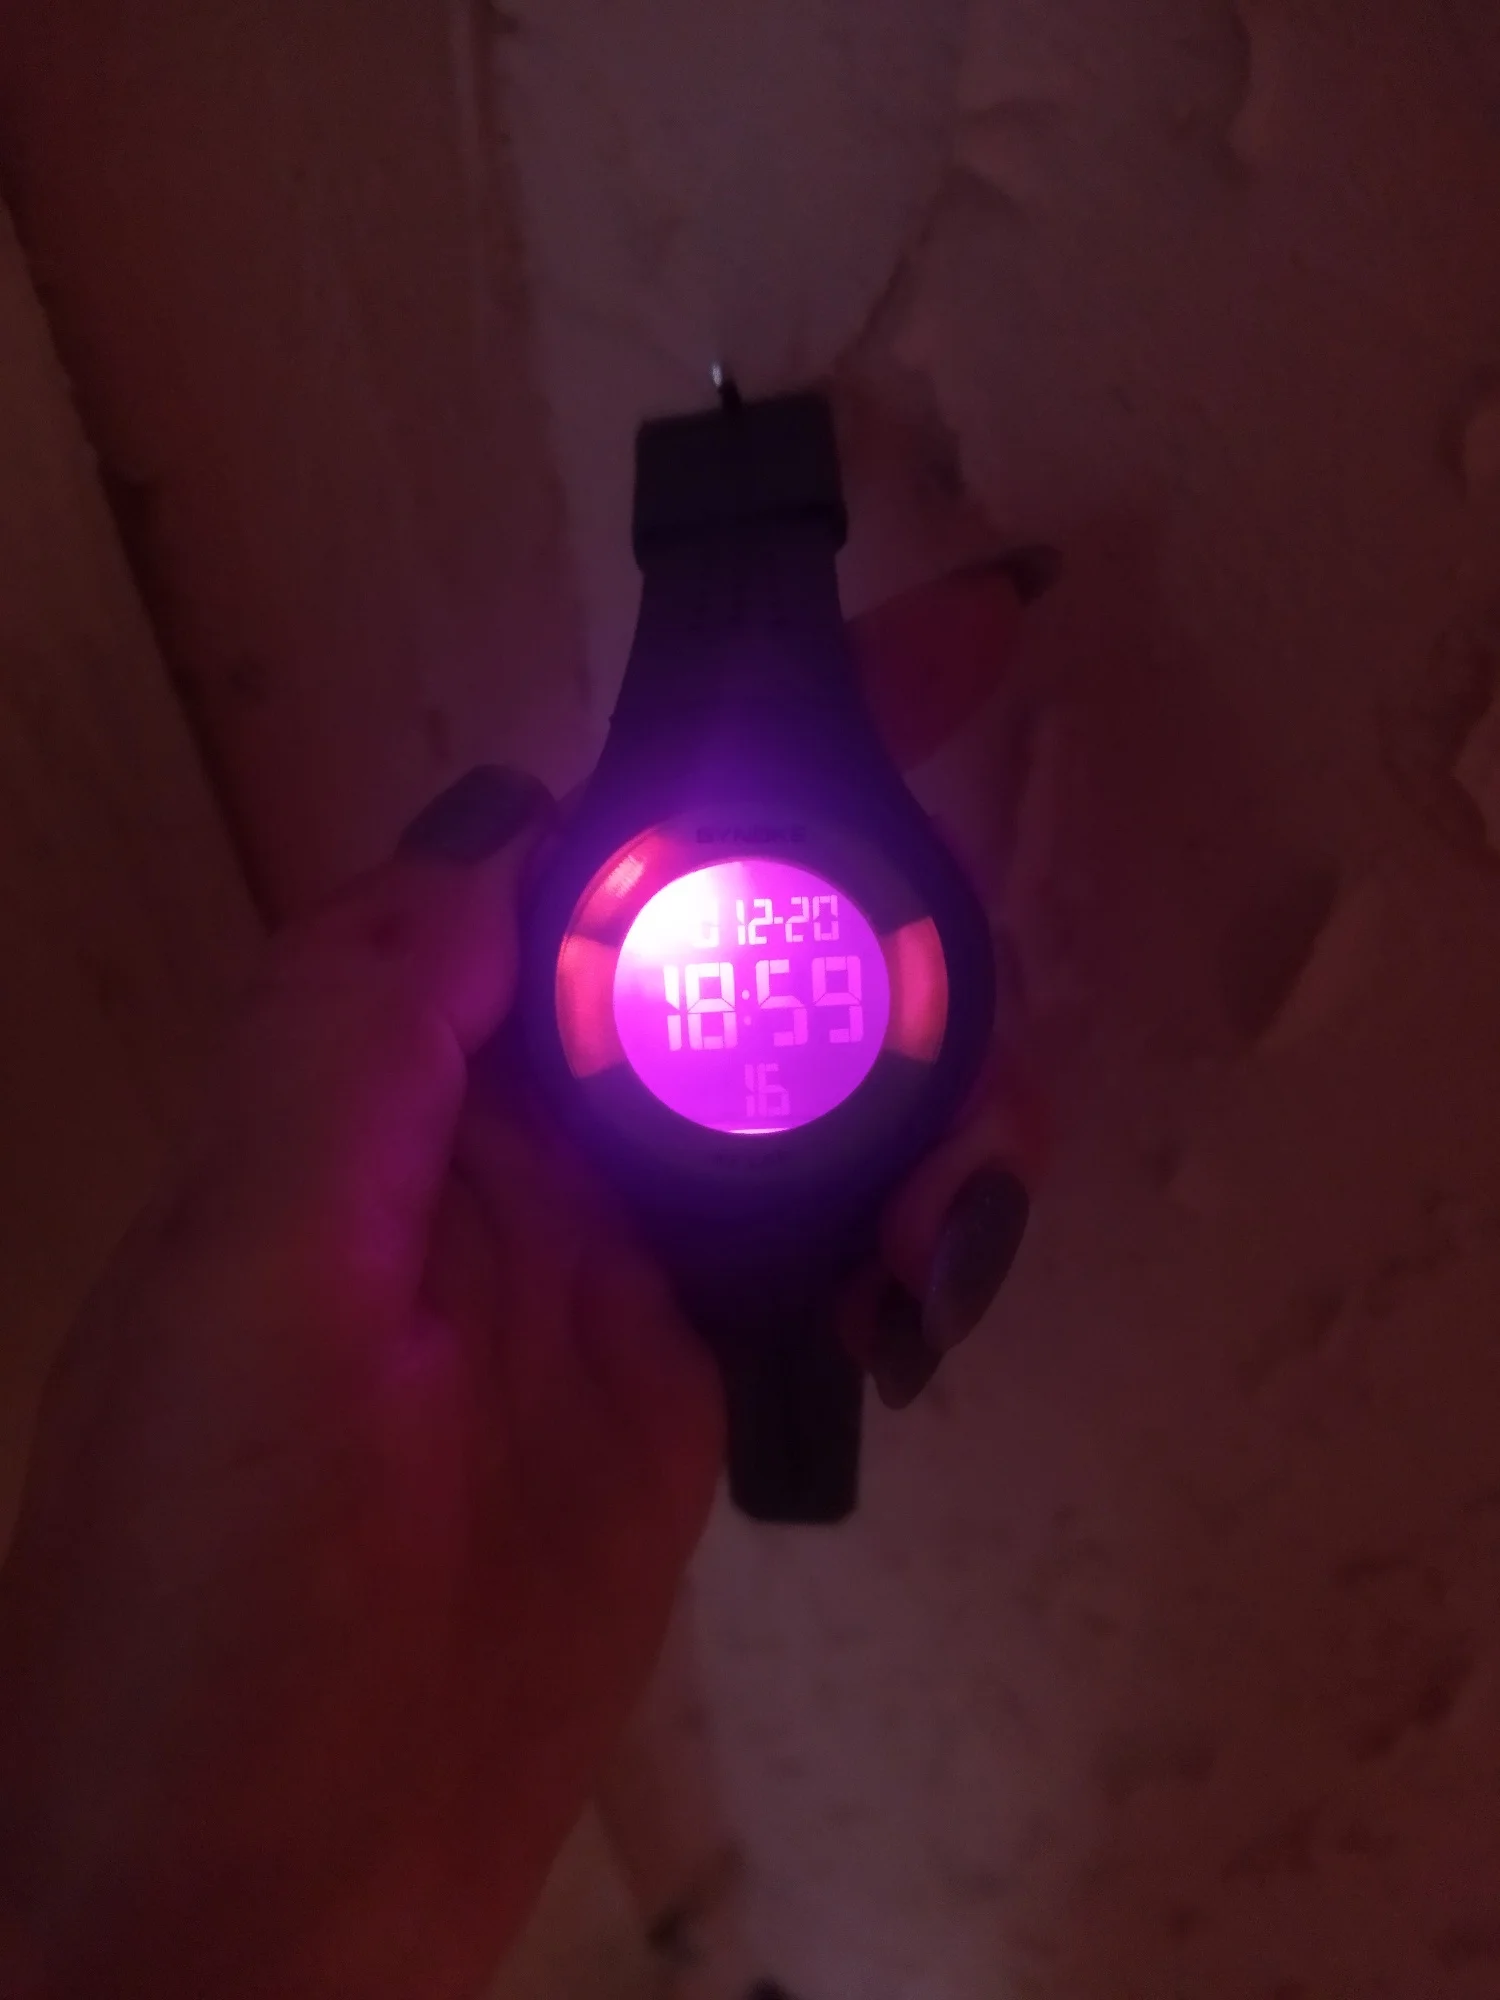 Synoke-Digital LED Watches for Men and Women,Water Resistant,Chronograph,Calendar,Alarm,Sport photo review